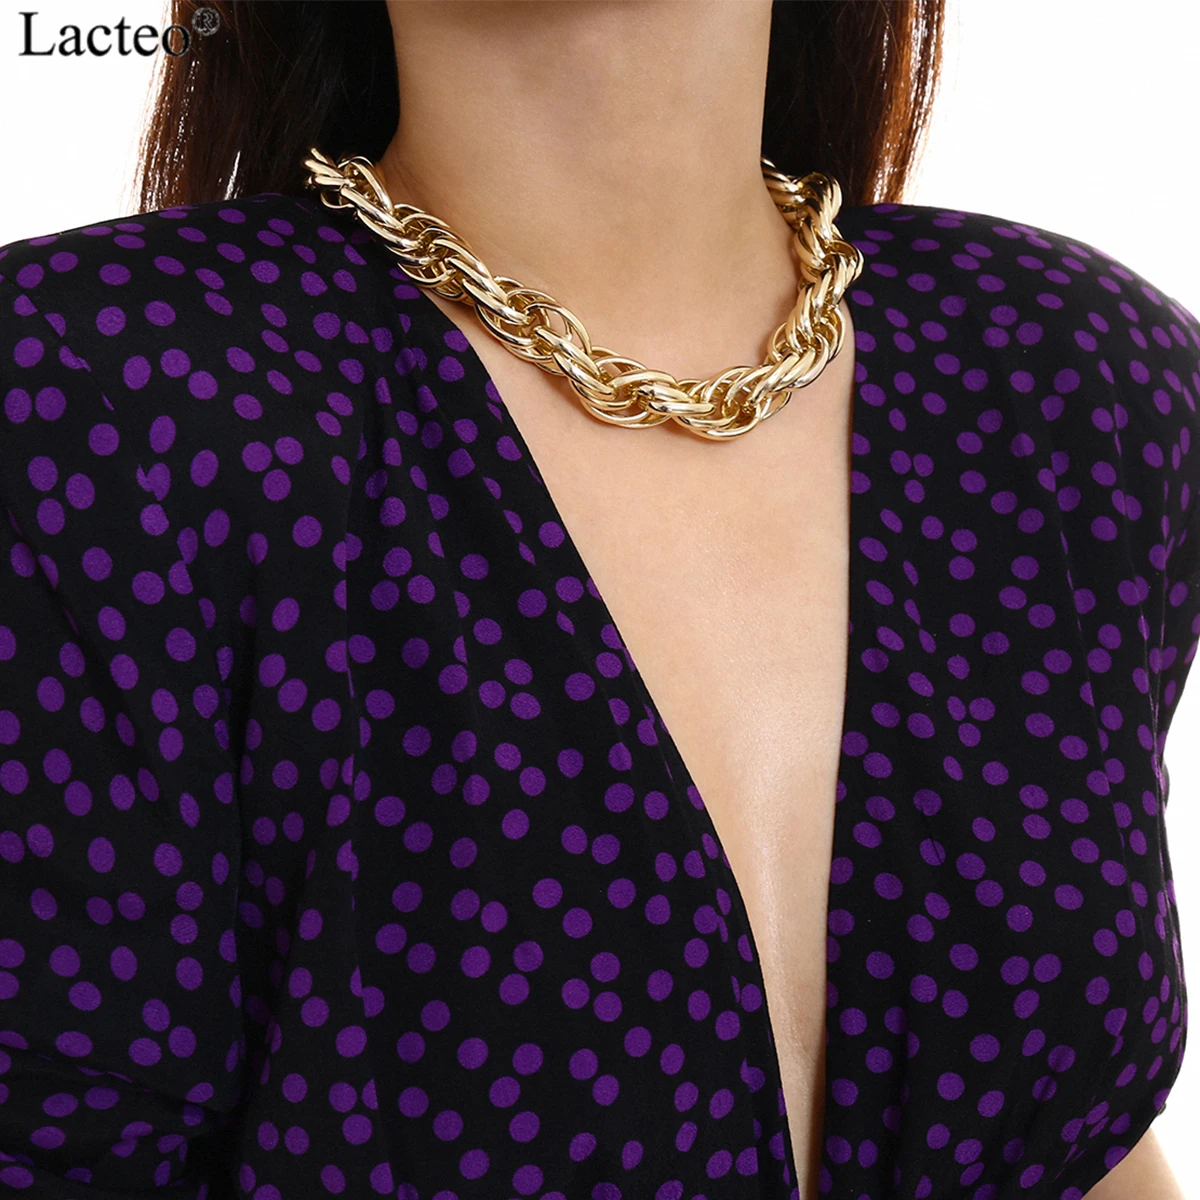 

Lacteo Punk HipHop Golden Color Collar Choker Necklace Women Exaggerated Multi Layer Twist Chain Charm Necklace Fashion Jewelry